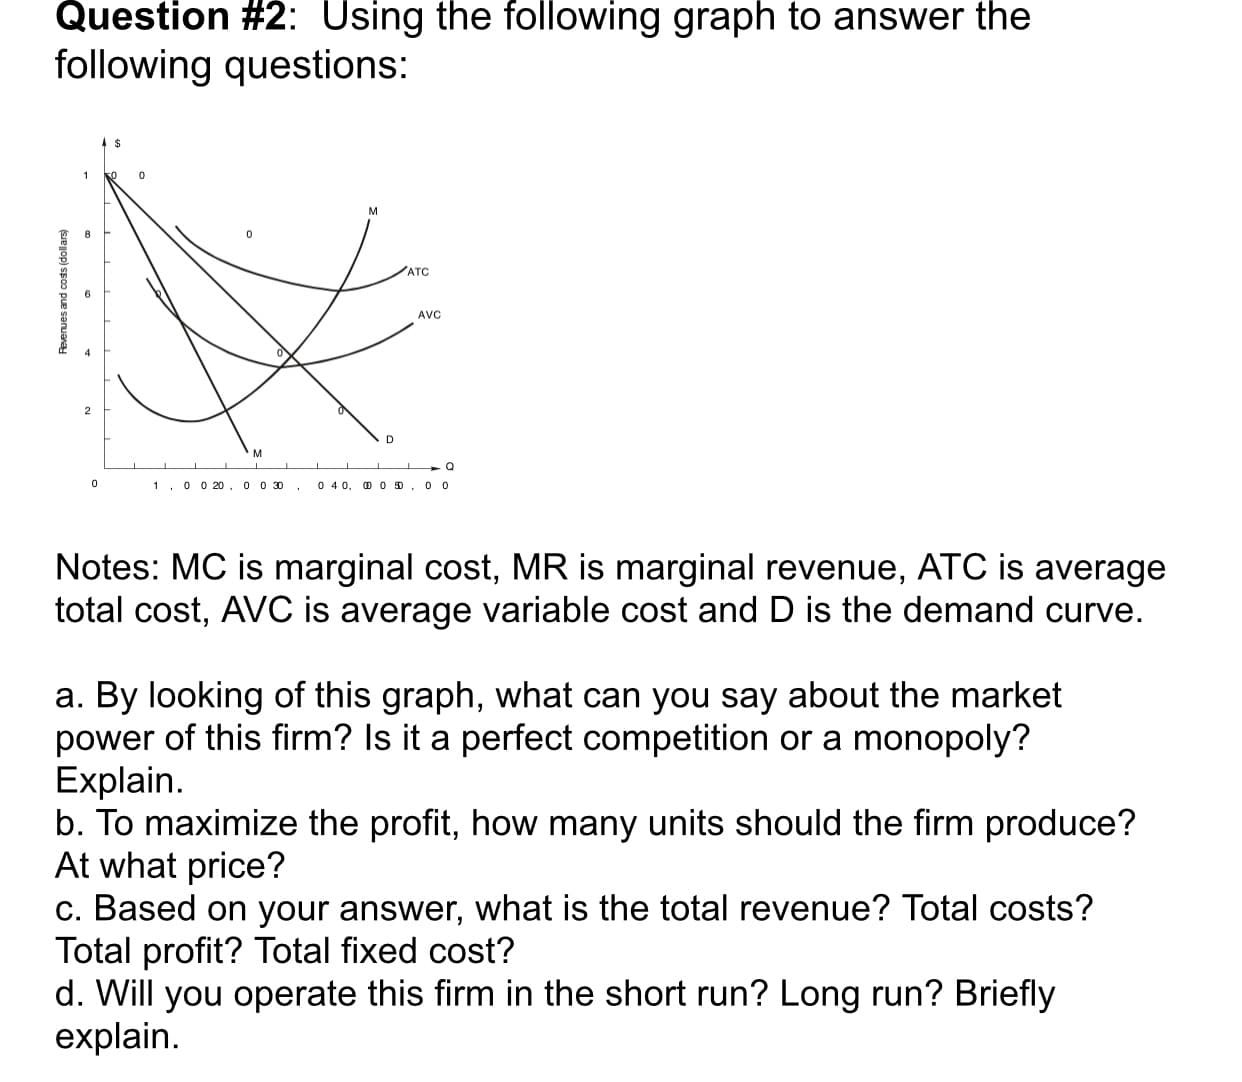 Question #2: Using the following graph to answer the
following questions:
ATC
AVC
Q
0 4 0, D 0 D
0 0 20, 00 30
0 0
1
Notes: MC is marginal cost, MR is marginal revenue, ATC is average
total cost, AVC is average variable cost and D is the demand curve.
By looking of this graph, what can you say about the market
power of this firm? Is it a perfect competition
Explain
b. To maximize the profit, how many units should the firm produce?
At what price?
C. Based on your answer, what is the total revenue? Total costs?
Total profit? Total fixed cost?
d. Will you operate this firm in the short run? Long run? Briefly
explain
а.
or a monopoly?
